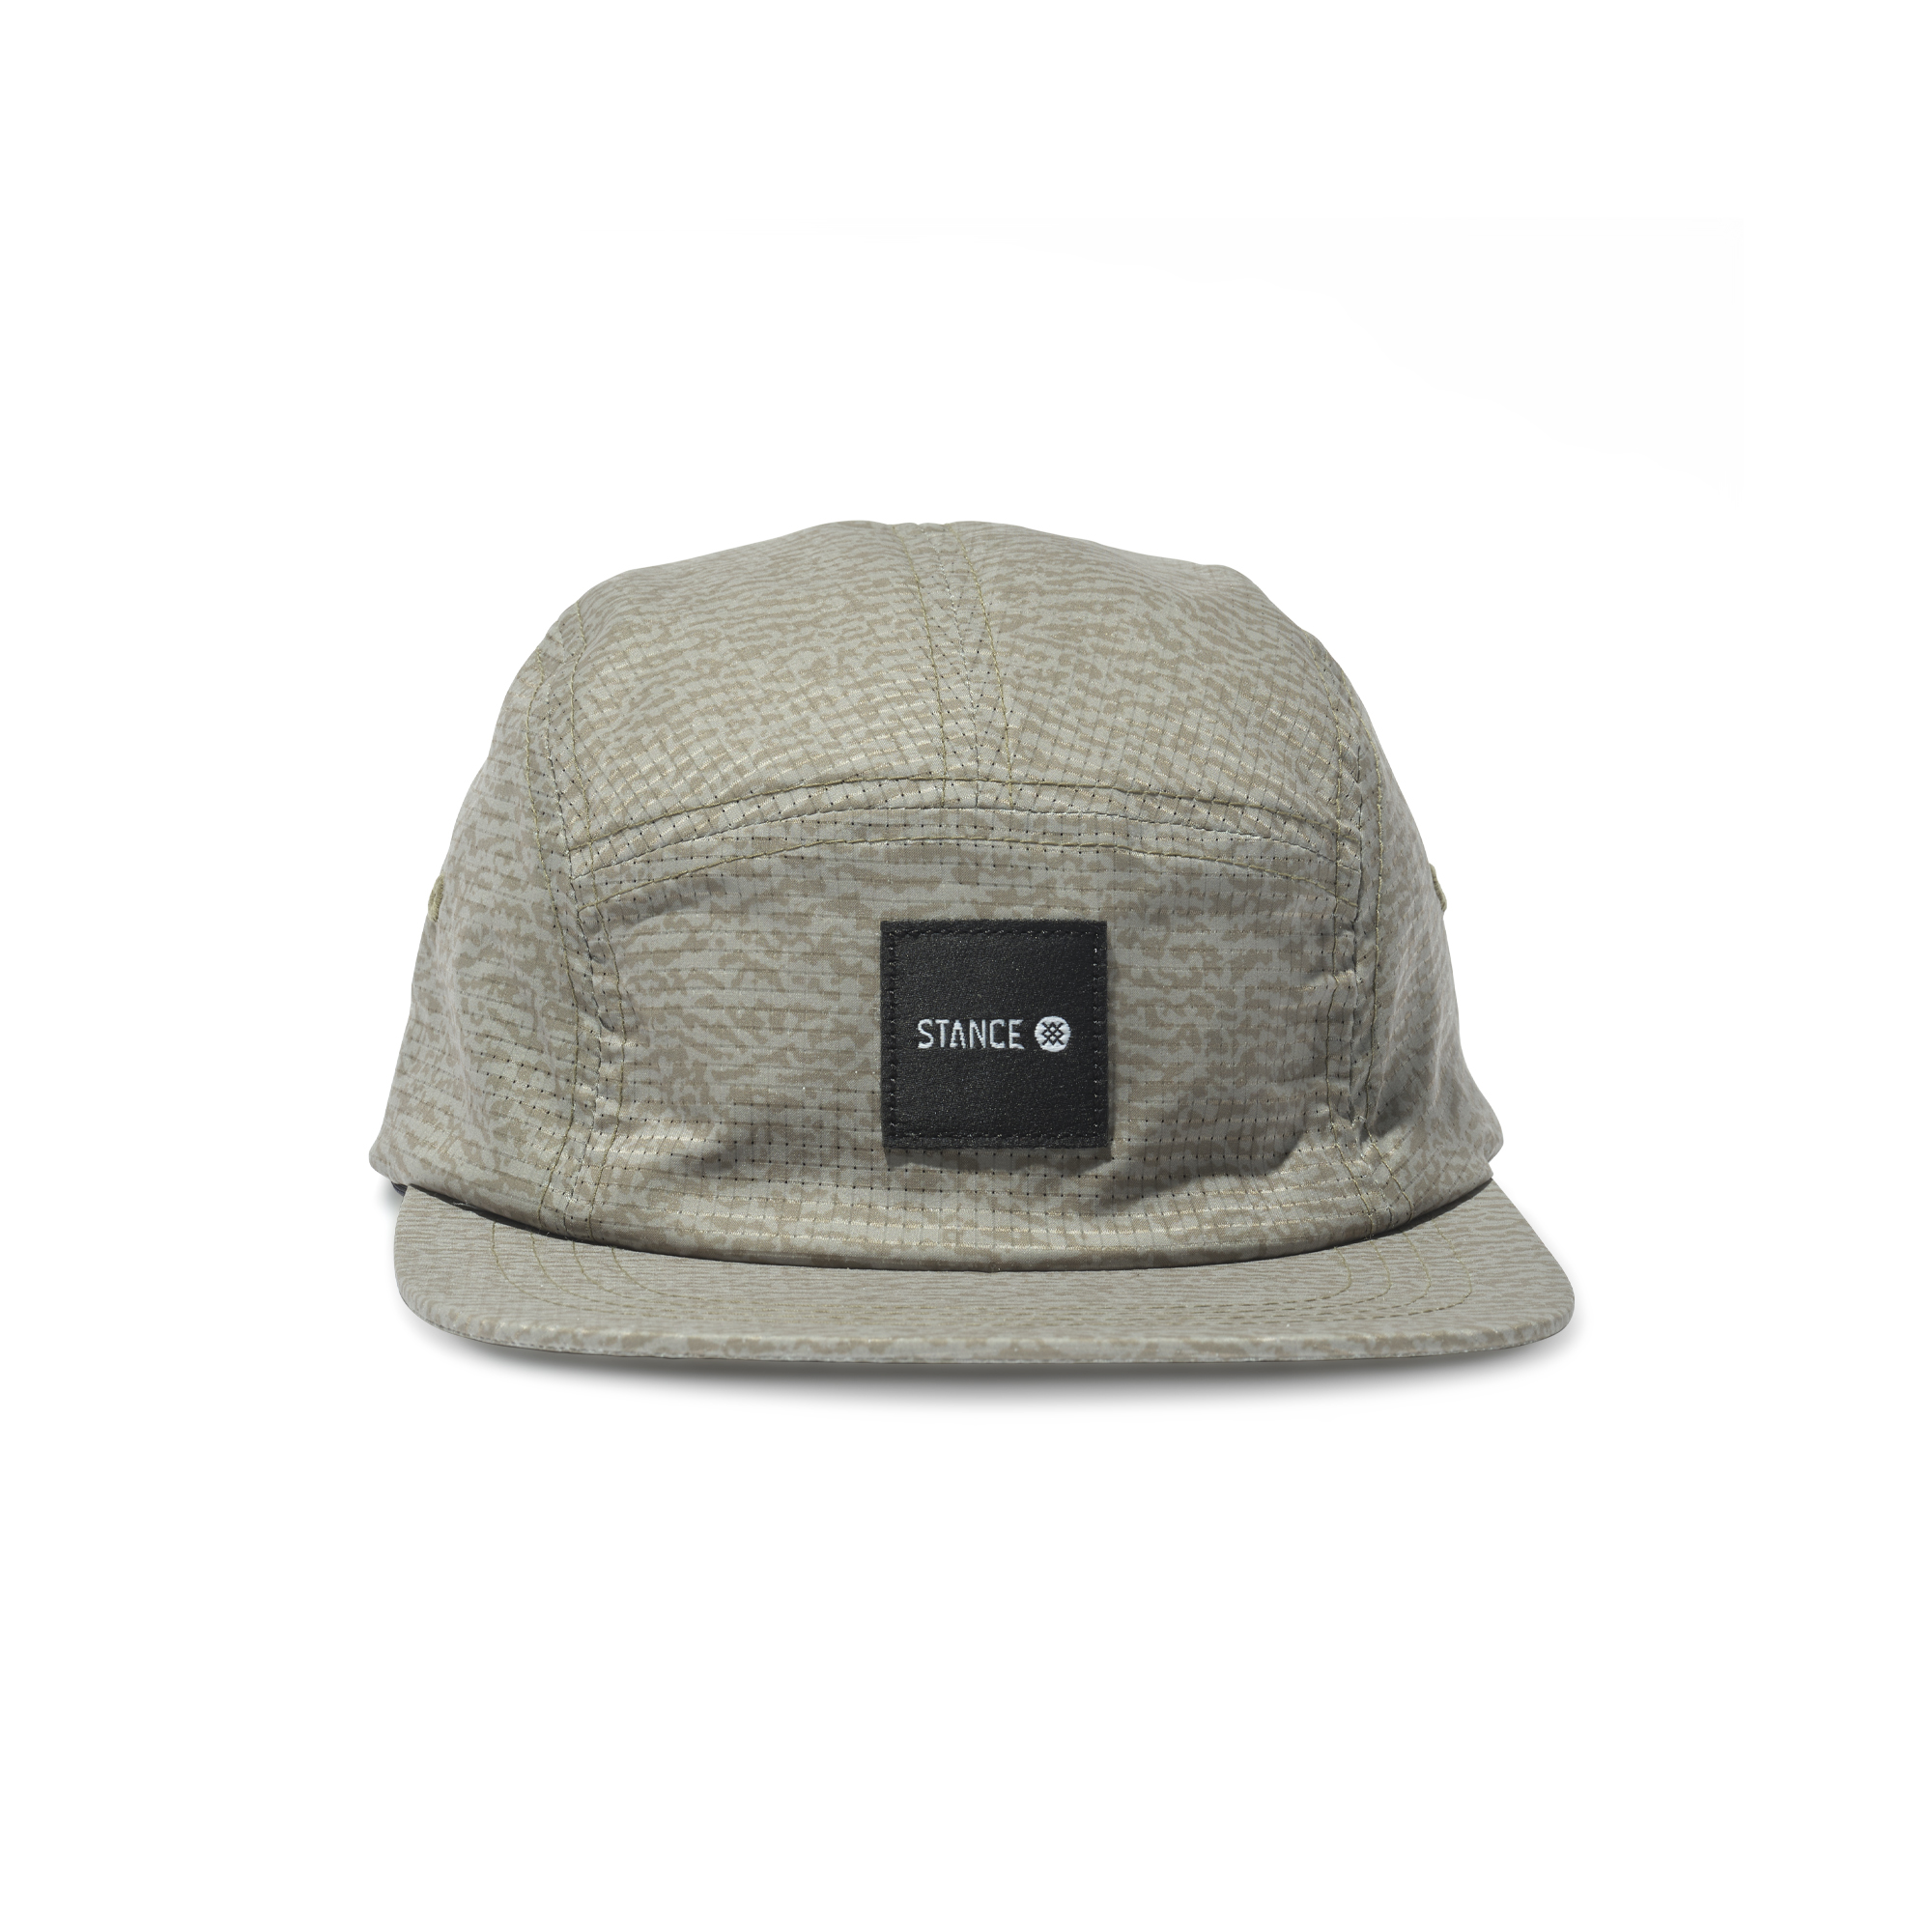 Kinectic 5 Panel Adjustable Cap | Stance